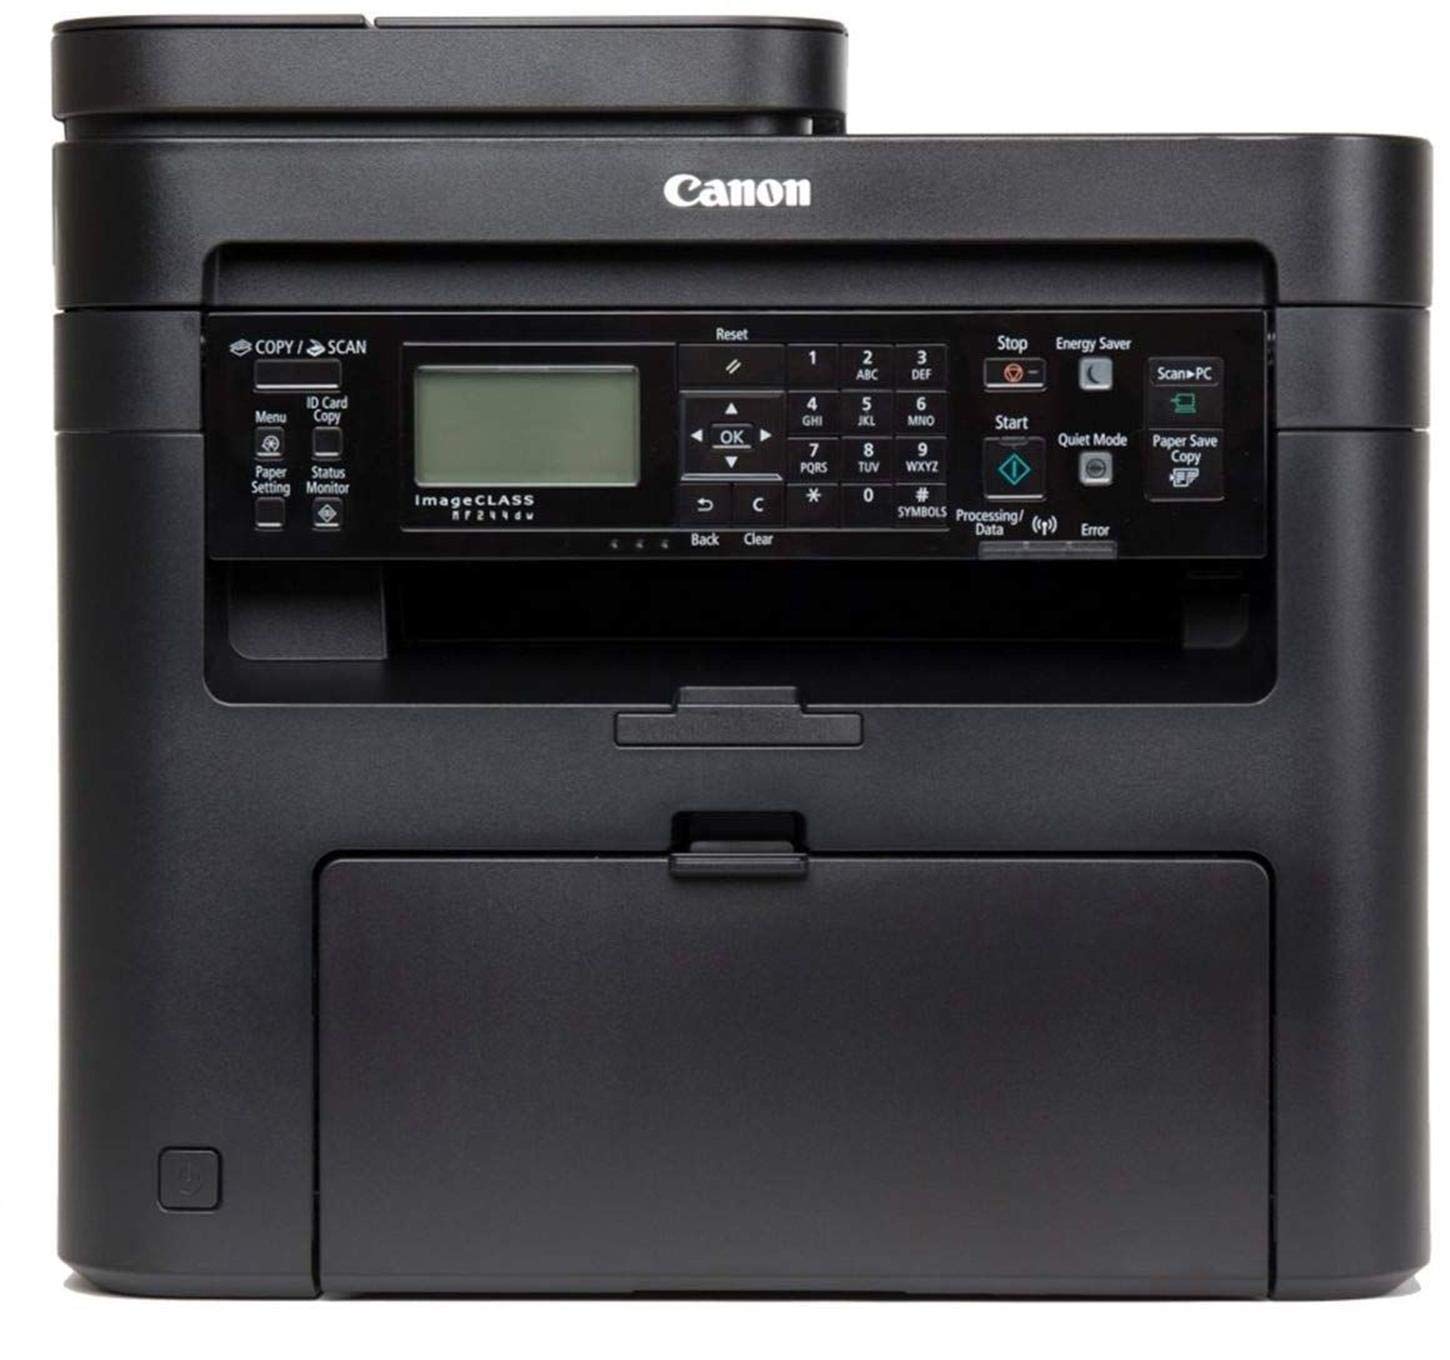 Best laser printer for home use - Canon MF244DW 